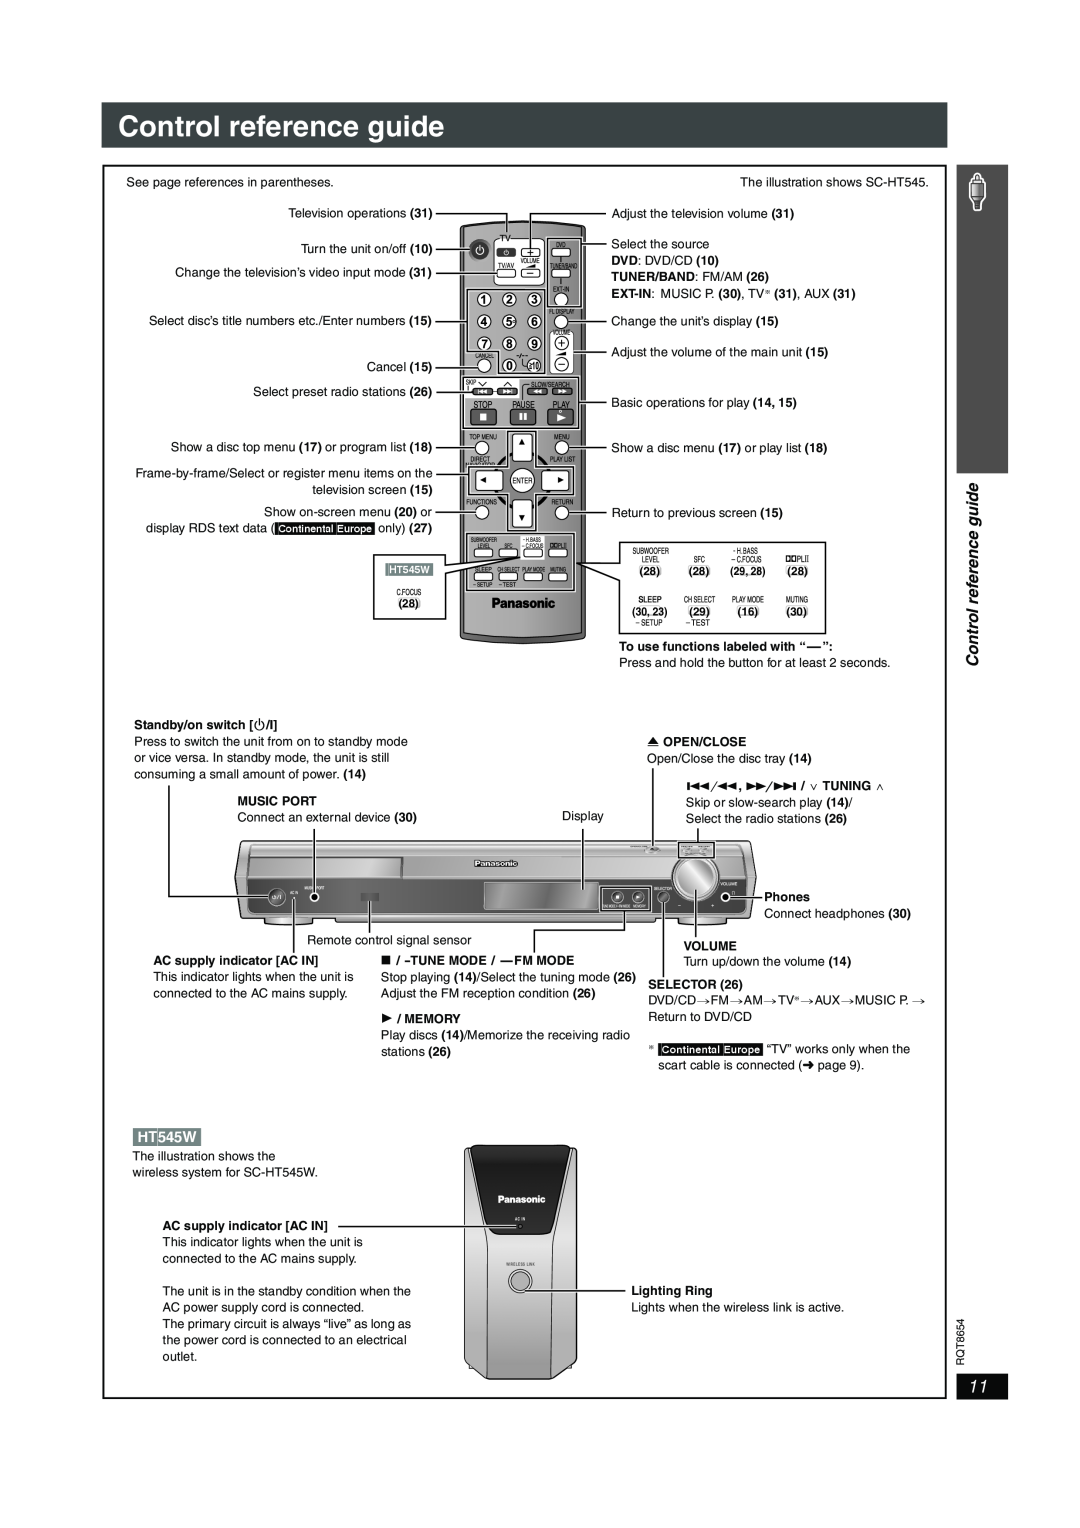 Panasonic SC-HT545W manual Control reference guide 